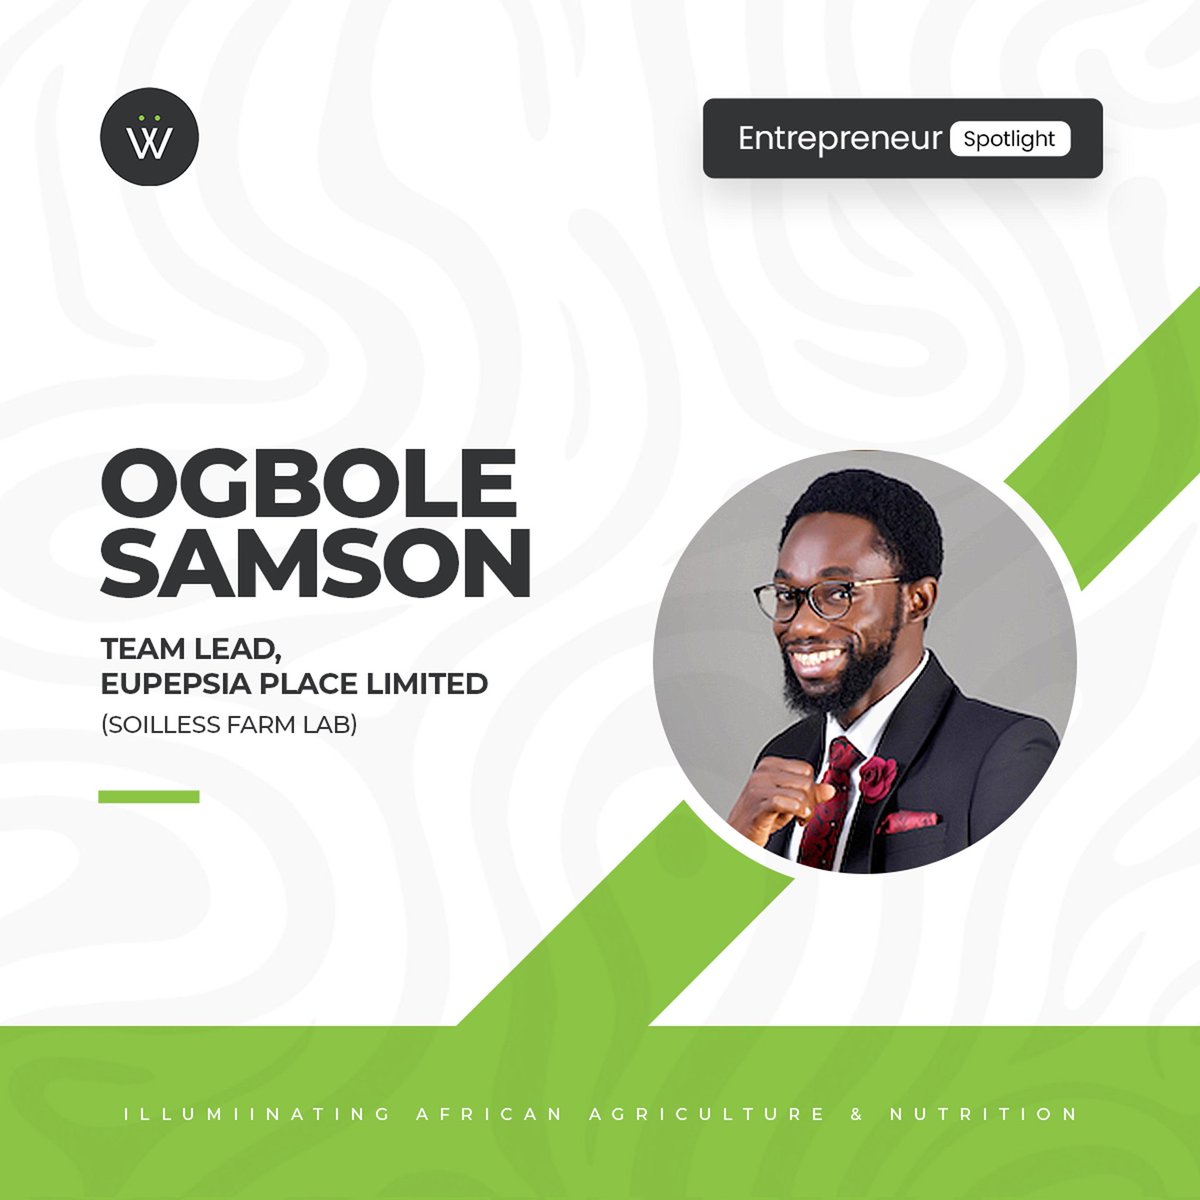 #EntrepreneurSpotlight

Meet @Samsonprolific, Team Lead @sFarmLab, pioneering soilless  farming technology to revolutionize agriculture.
Join us in celebrating his remarkable contributions to agriculture and a more sustainable future👏

#Wandieville #SustainableFarming #AgriTech